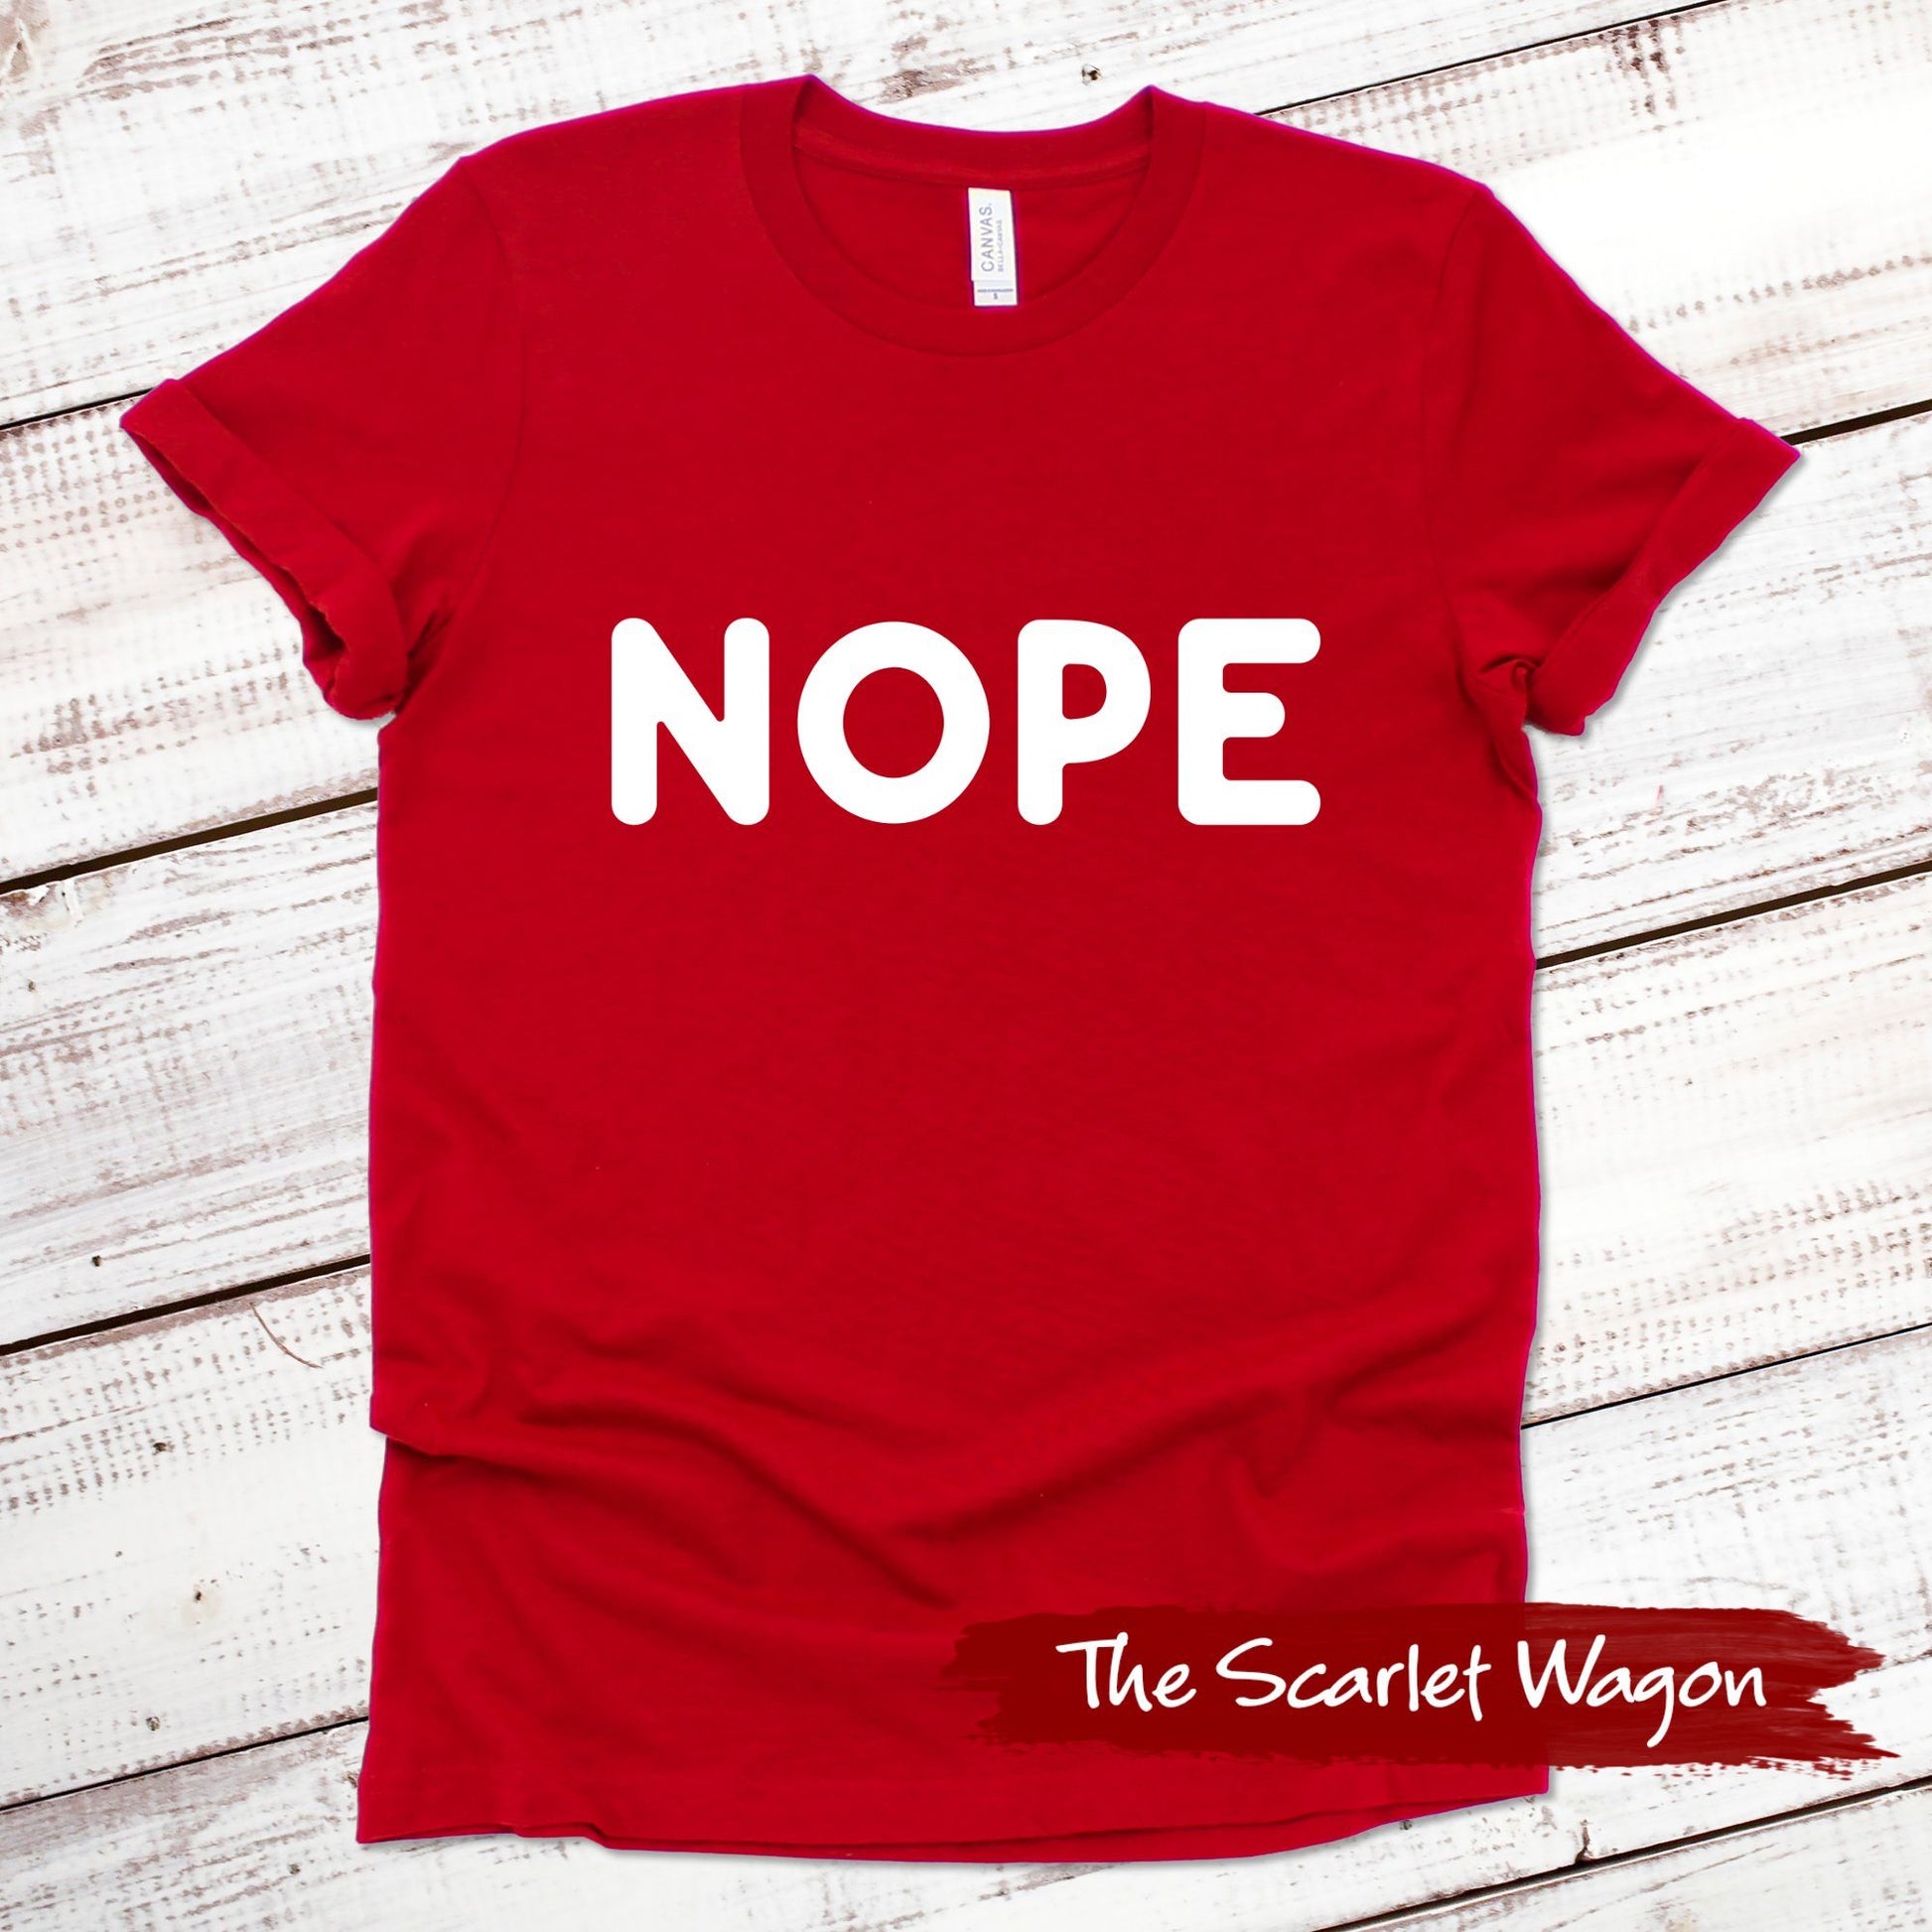 Nope Funny Shirt Scarlet Wagon Red XS 